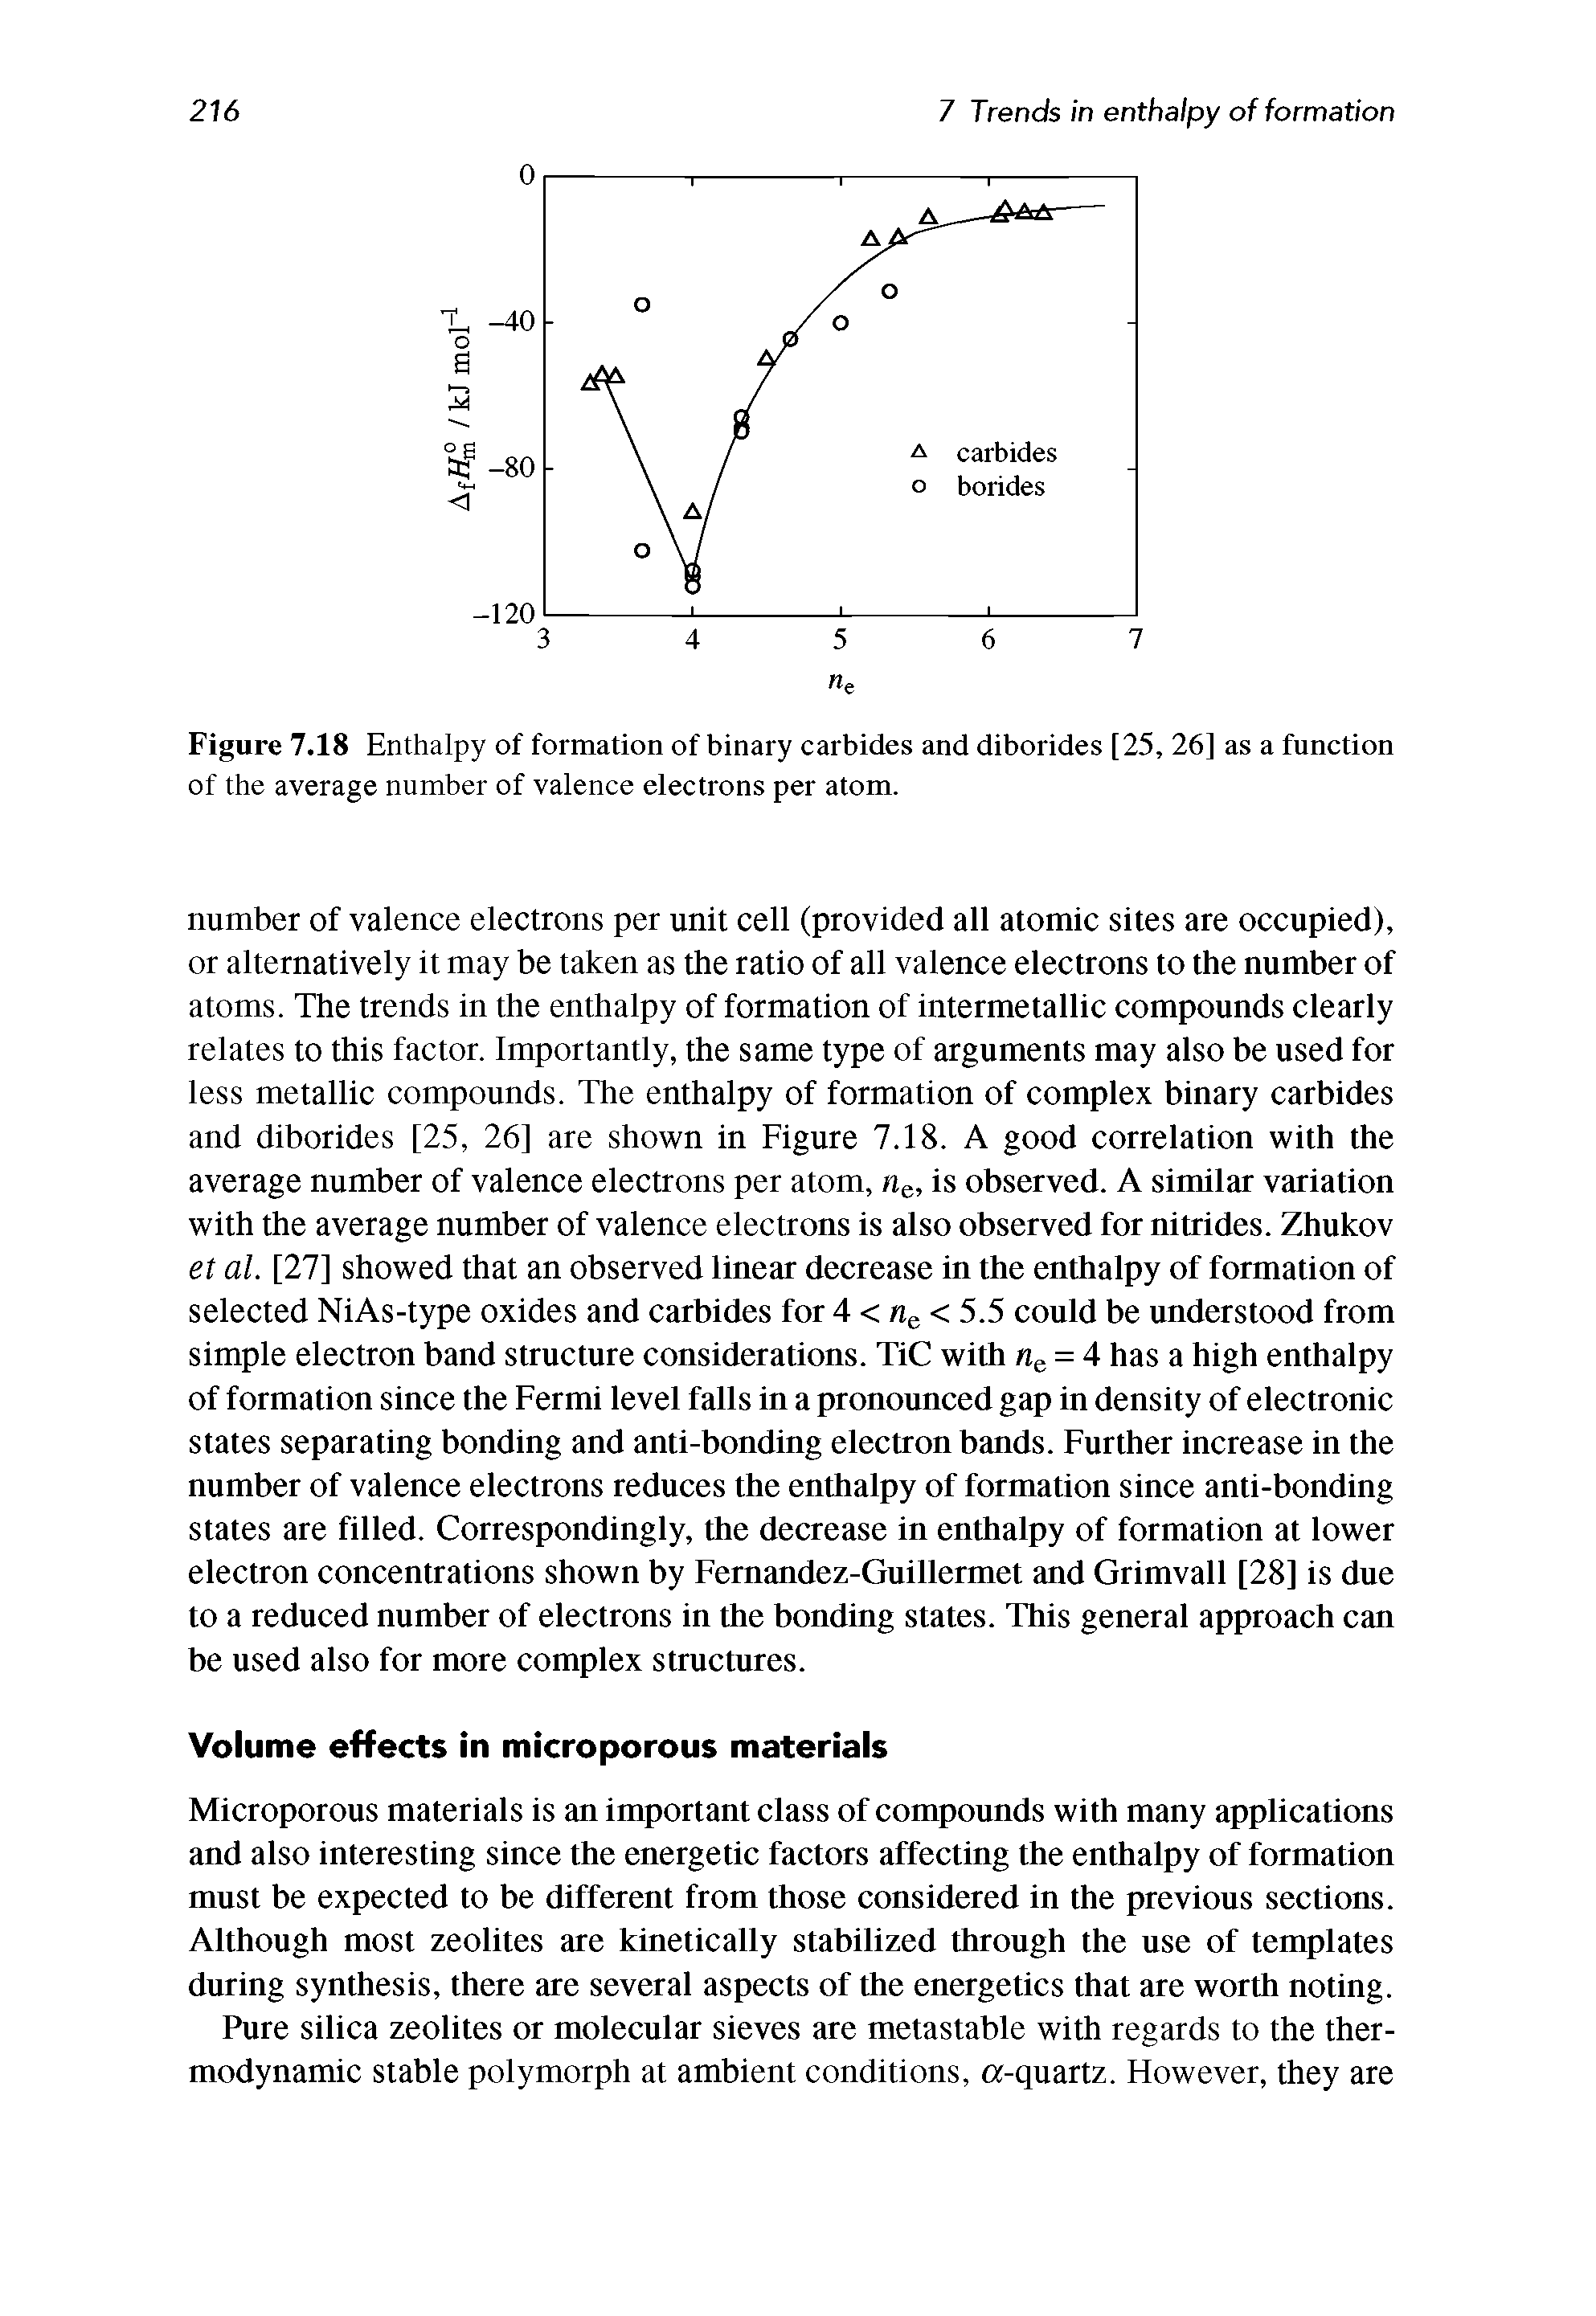 Figure 7.18 Enthalpy of formation of binary carbides and diborides [25, 26] as a function of the average number of valence electrons per atom.